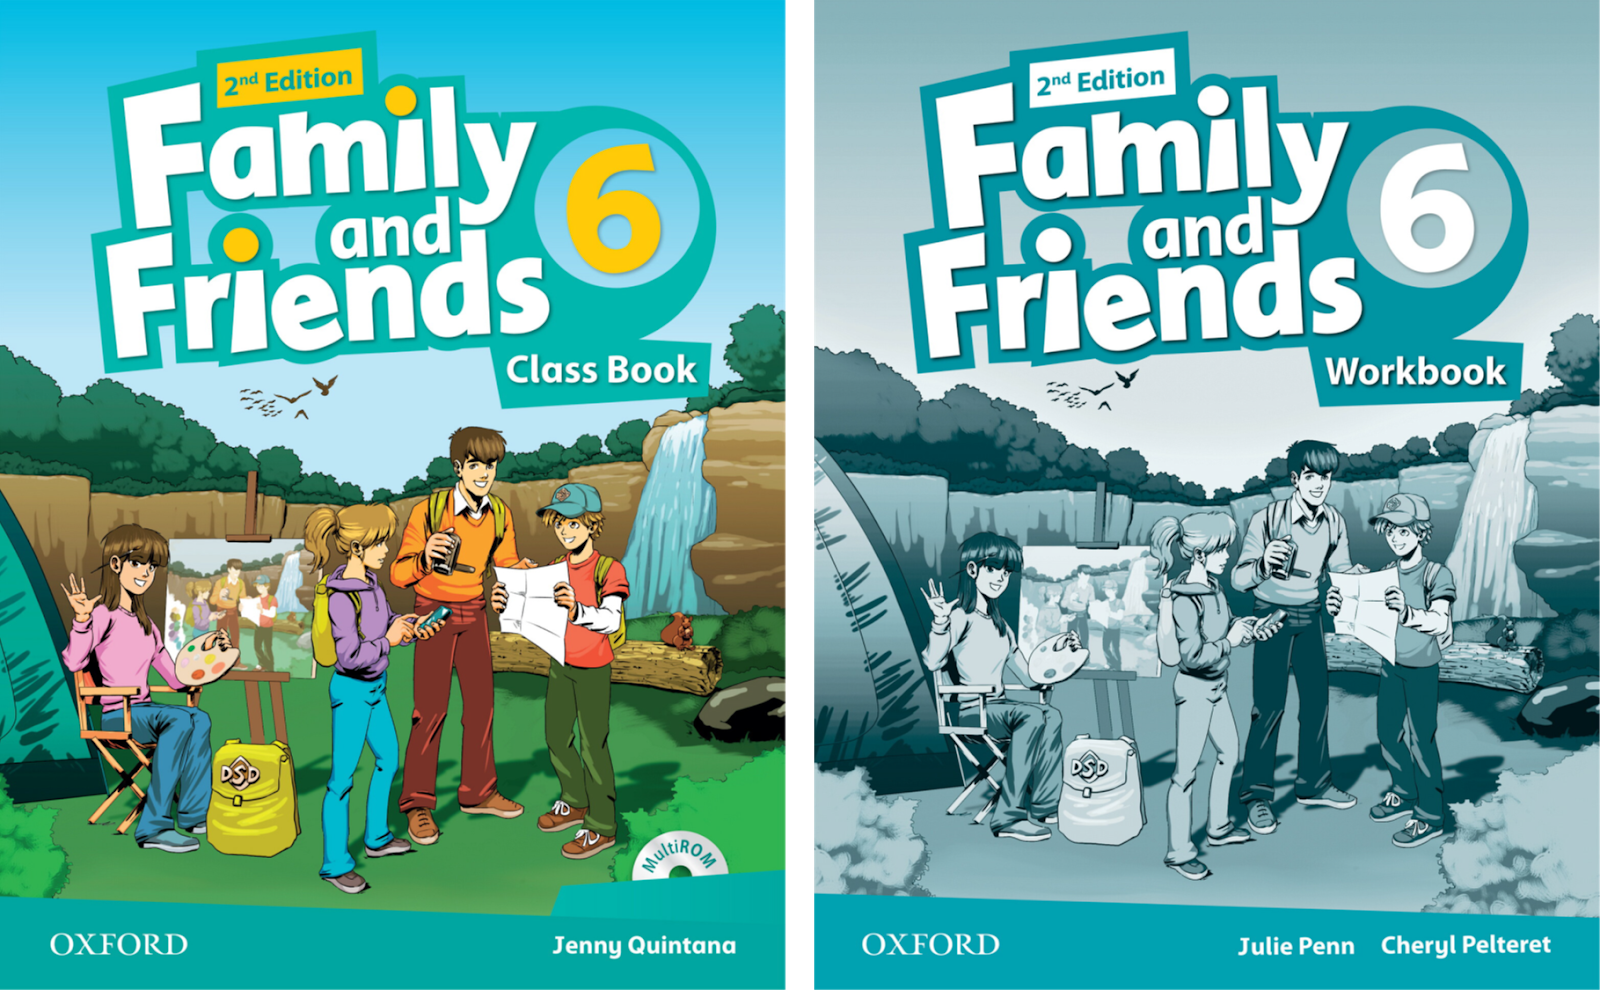 Family and friends students book. Family and friends 2 первое издание. Family and friends 2 2nd Edition Classbook. Family and friends (2nd Edition) 1 class book. \Фэмили энд френдс 2 издание.